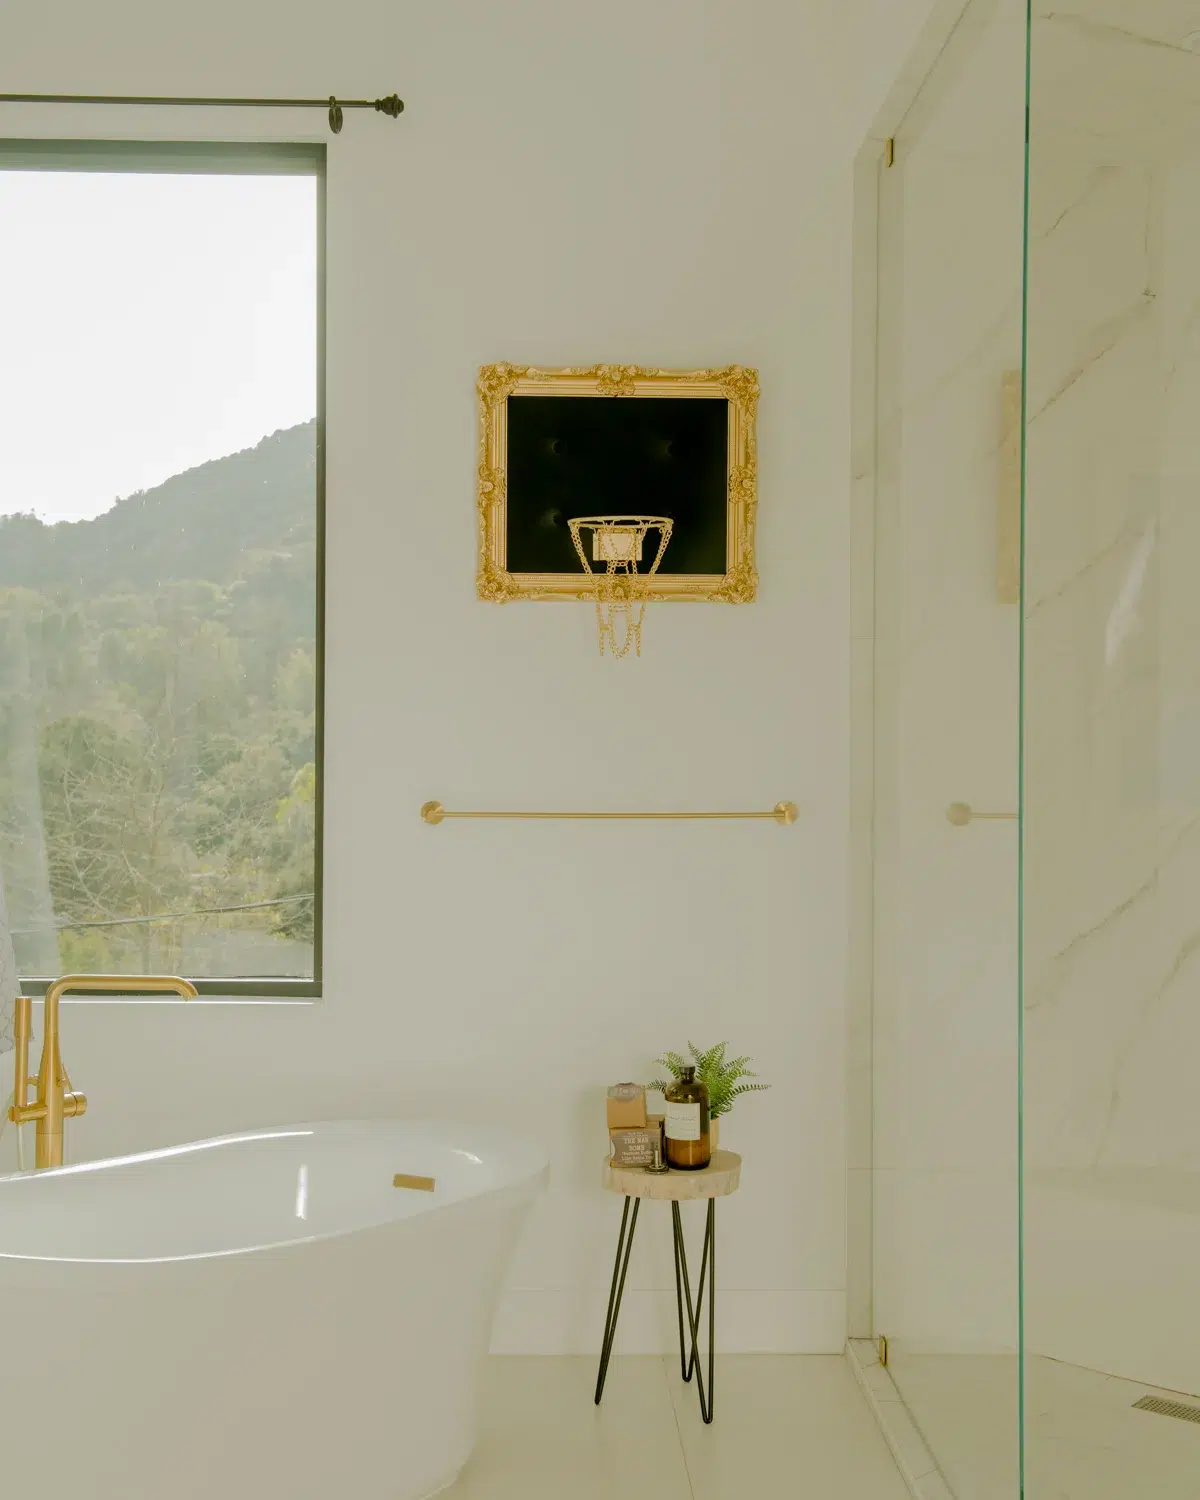 A luxurious home bathroom with a gold tub and mirror.